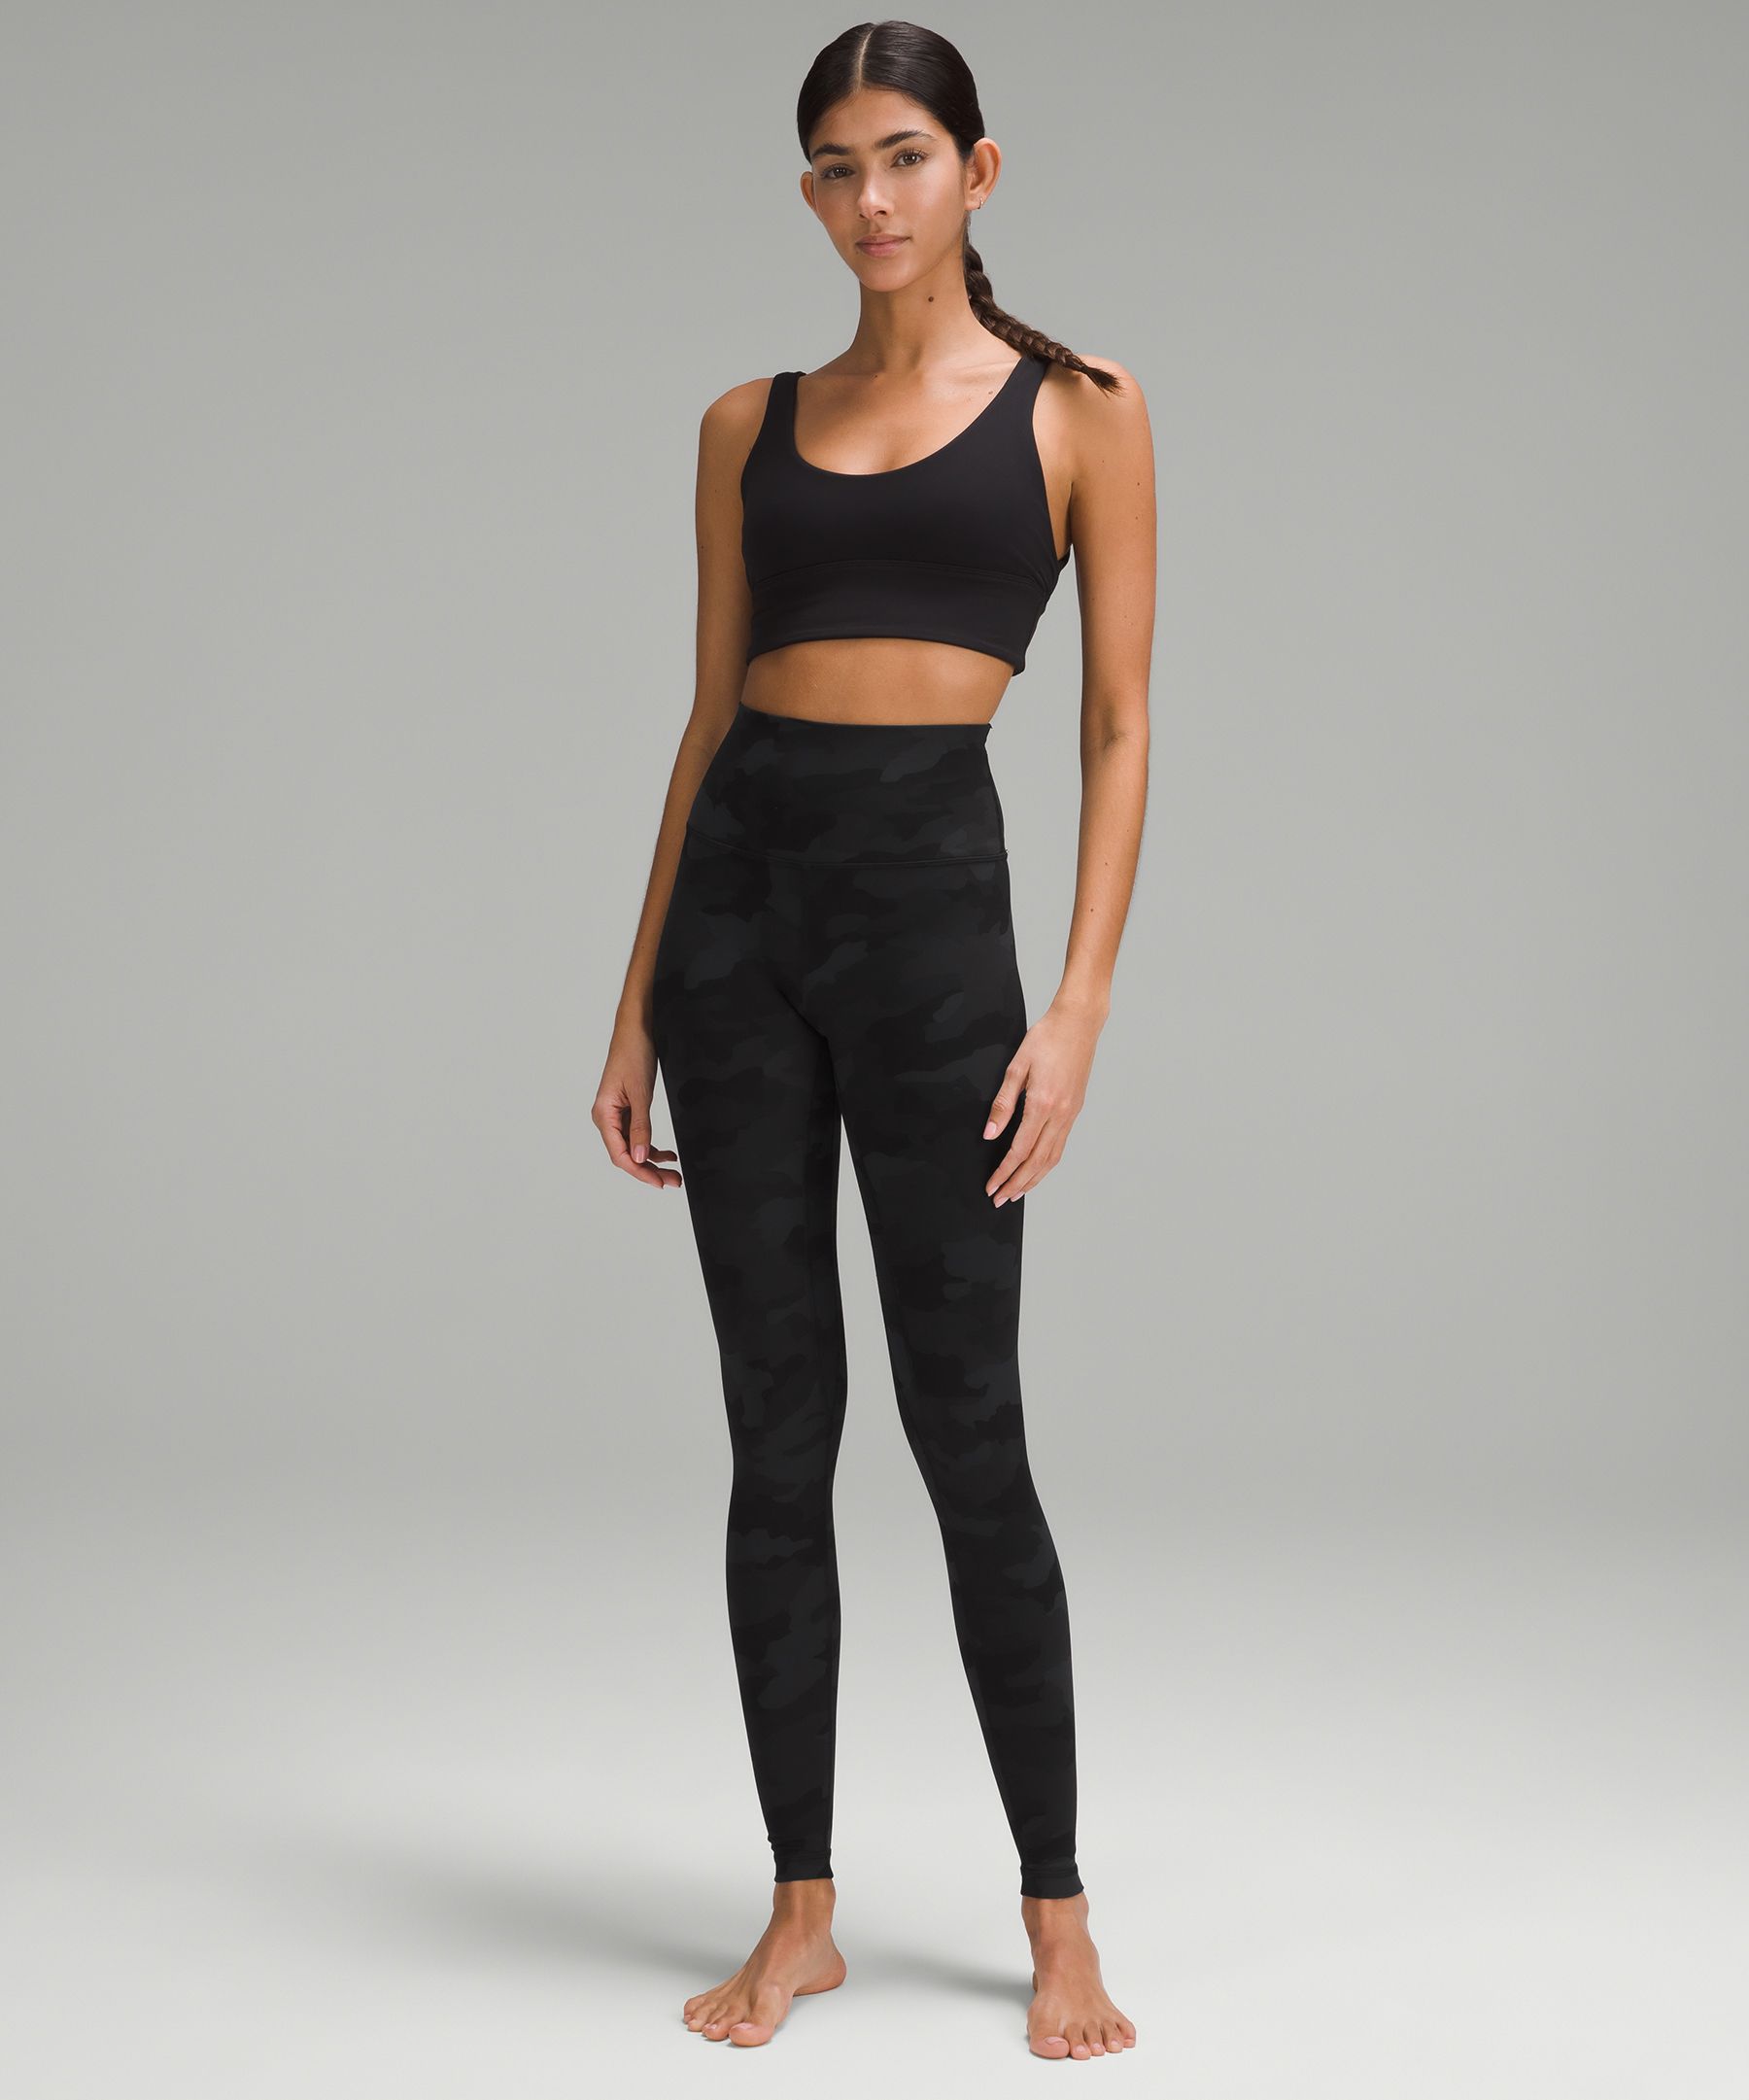 Lululemon Align high rise legging in Cassis, 28 inch Size 6 - $75 (23% Off  Retail) - From D